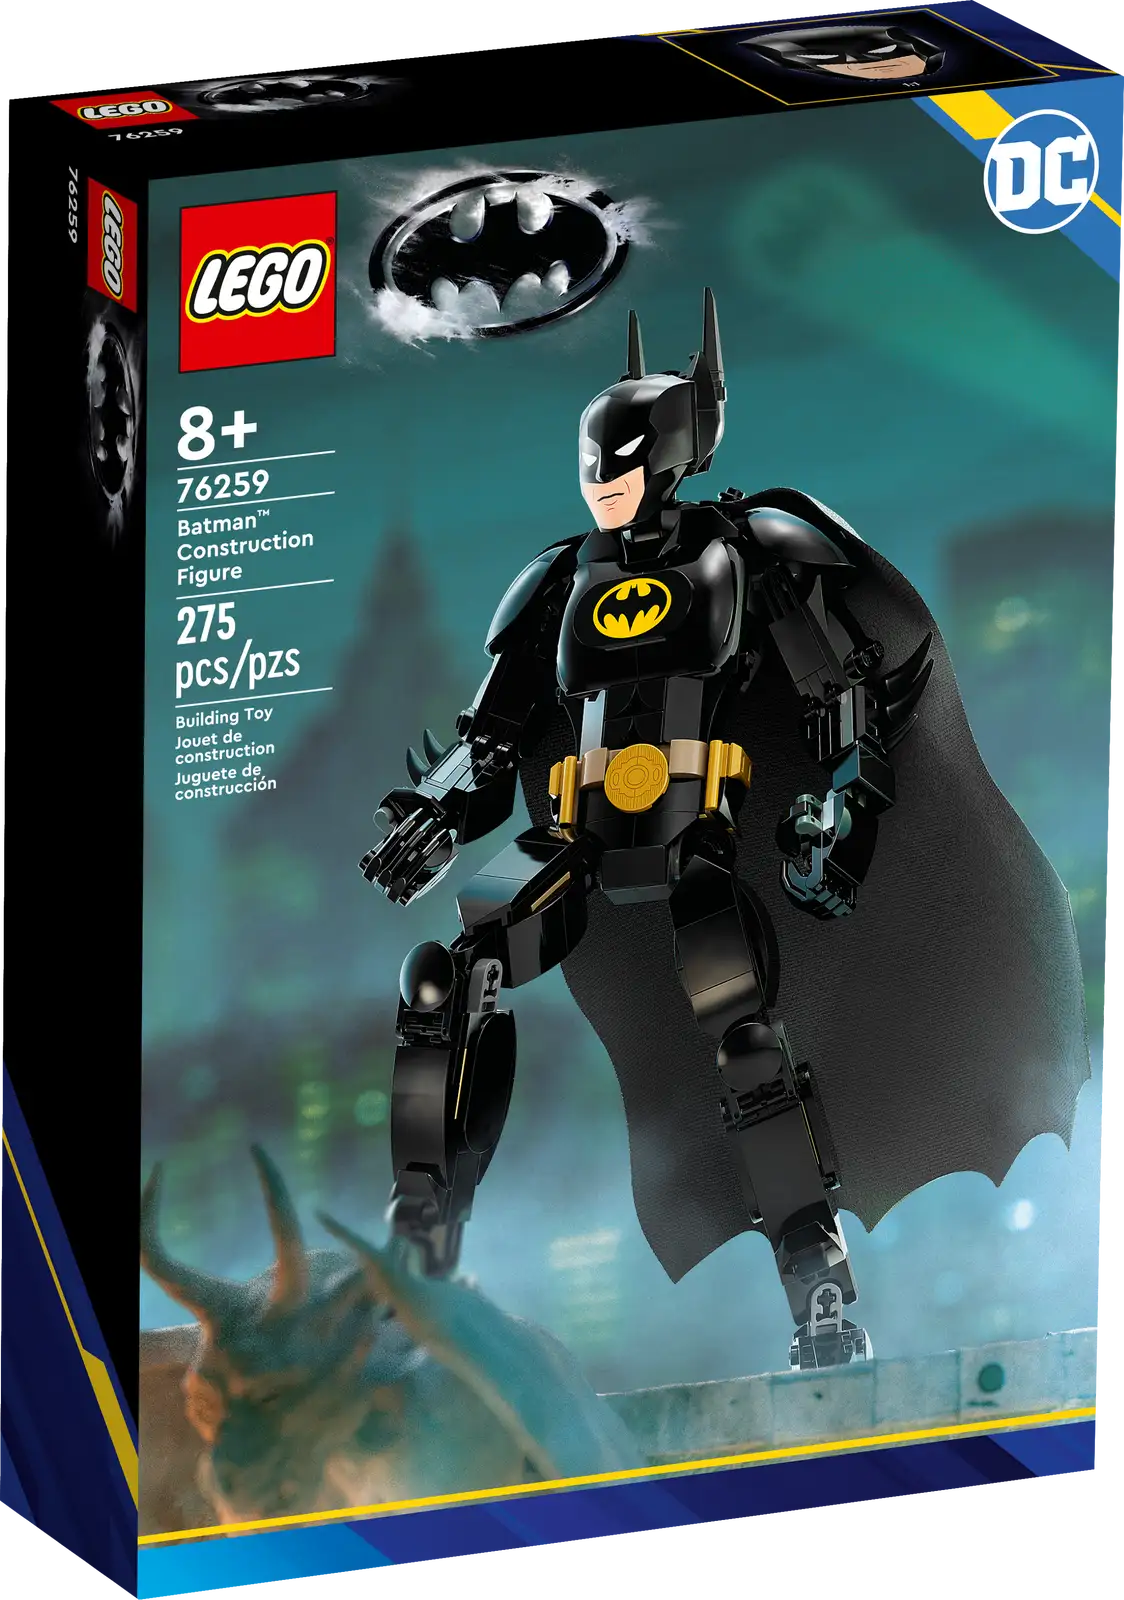 Put the future of GOTHAM CITY™ into the hands of your young crimefighter with the LEGO® DC Batman™ Construction Figure (76259). Standing over 10.5 in. (26 cm) tall, this fully jointed, authentically detailed Batman toy will encourage kids aged 8+ to discover their inner superhero. Realistic recreation The figure captures the style and strength of Batman as depicted in the 1989 Batman movie. With movable shoulder, arm, hip and leg joints, this versatile action toy is enjoyable to build, play with and put on display. Authentically detailed and featuring a full-length textile cape, this portable figure inspires endless play possibilities wherever kids go. For added digital fun, builders can zoom in, rotate the set in 3D and track their progress using the fun, intuitive LEGO Builder app. Batman™ action figure – Put Super Hero action into kids’ hands with the LEGO® DC Batman Construction Figure (76259). Fully jointed for imaginative action and adventure Iconic Super Hero – The 275-piece figure features movable shoulder, arm, hip and leg joints and includes the character’s distinctive textile cape Position and pose – The multi-jointed figure easily adjusts, allowing kids to recreate favorite movie scenes and play out endless imaginative stories of their own Gift for kids – Give this hands-on play figure to a young Super Hero aged 8 and up as a birthday, holiday or just-because gift Portable play – Standing over 10.5 in. (26 cm) tall, this versatile figure lets kids take their adventures with them wherever they go Intuitive building instructions – Kids can download the LEGO® Builder app for an immersive building experience, with digital tools to zoom in and rotate models in 3D, save sets and track progress Quality guaranteed – LEGO® components meet stringent industry quality standards to ensure they are consistent, compatible and easy to build with Safety assured – LEGO® bricks and pieces are dropped, heated, crushed, twisted and analyzed to make sure they satisfy rigorous global safety standards